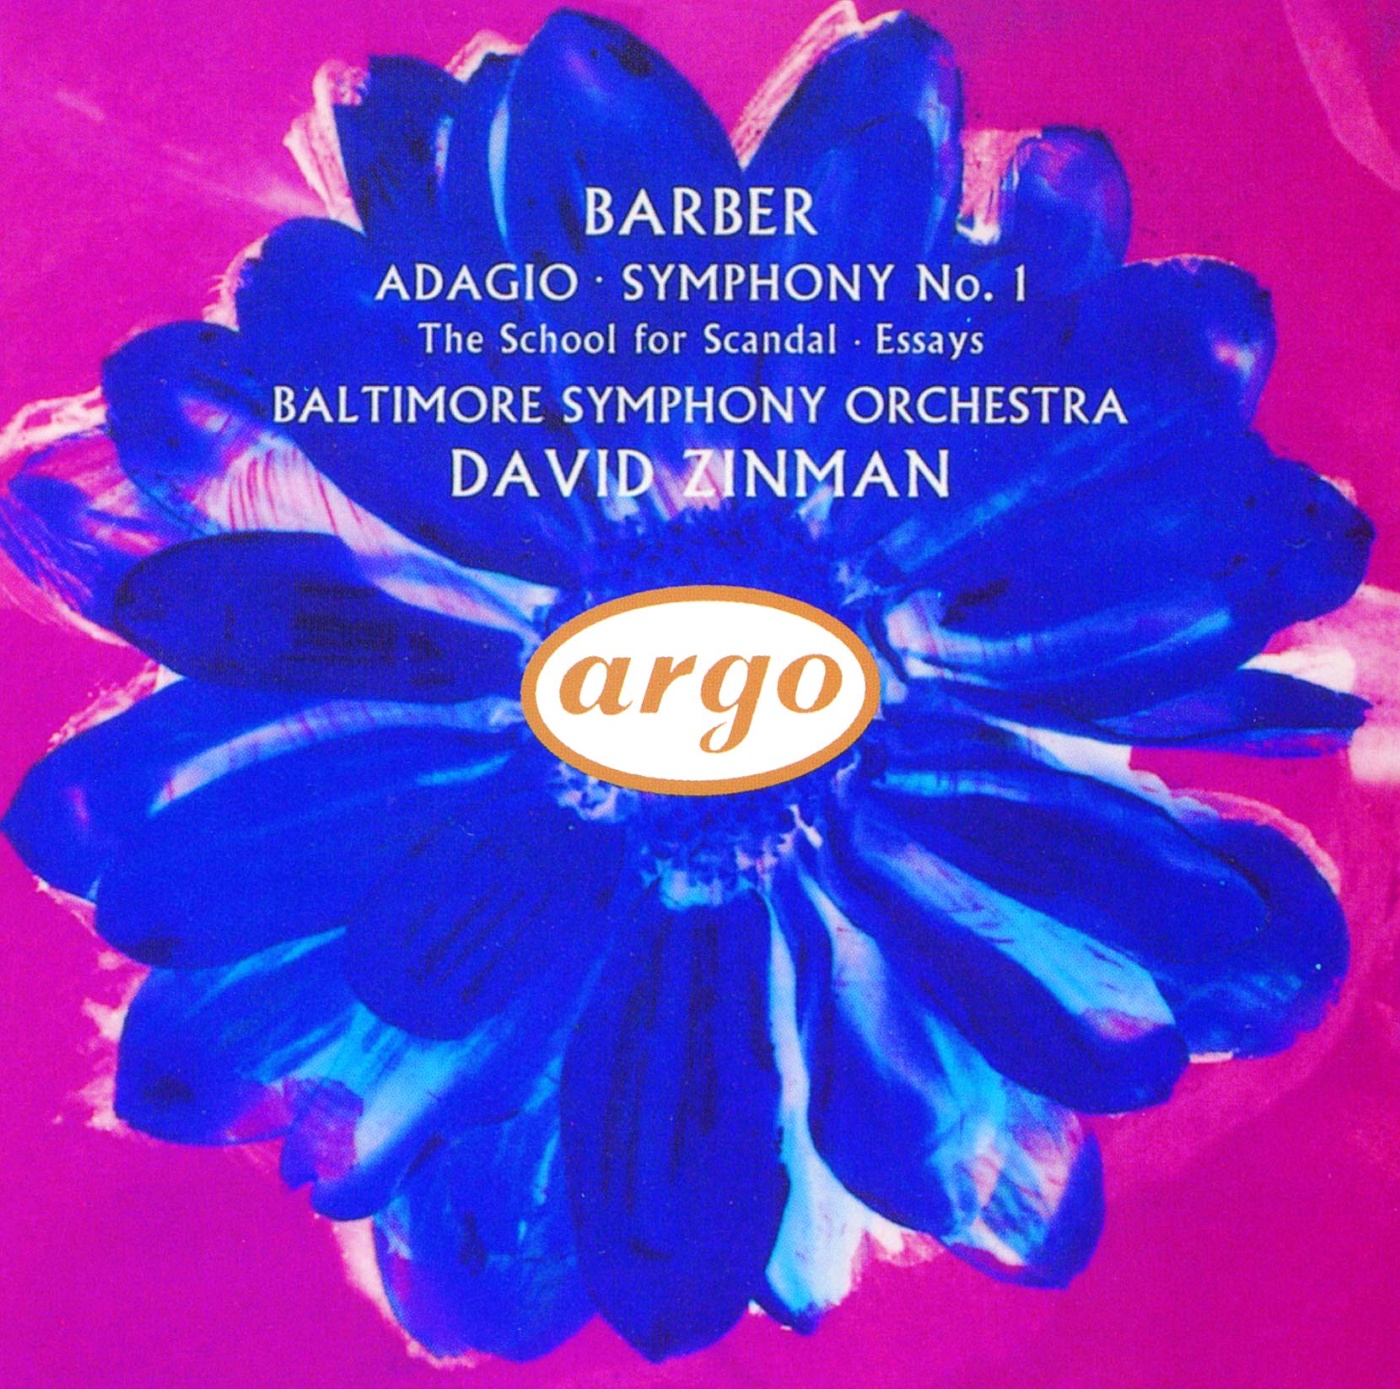 Barber adagio. Adagio for Strings, op. 11 Samuel Barber. Barber, Samuel - Symphonies nos 1 & 2 - essay for Orchestra - Overture to the School for scandal.